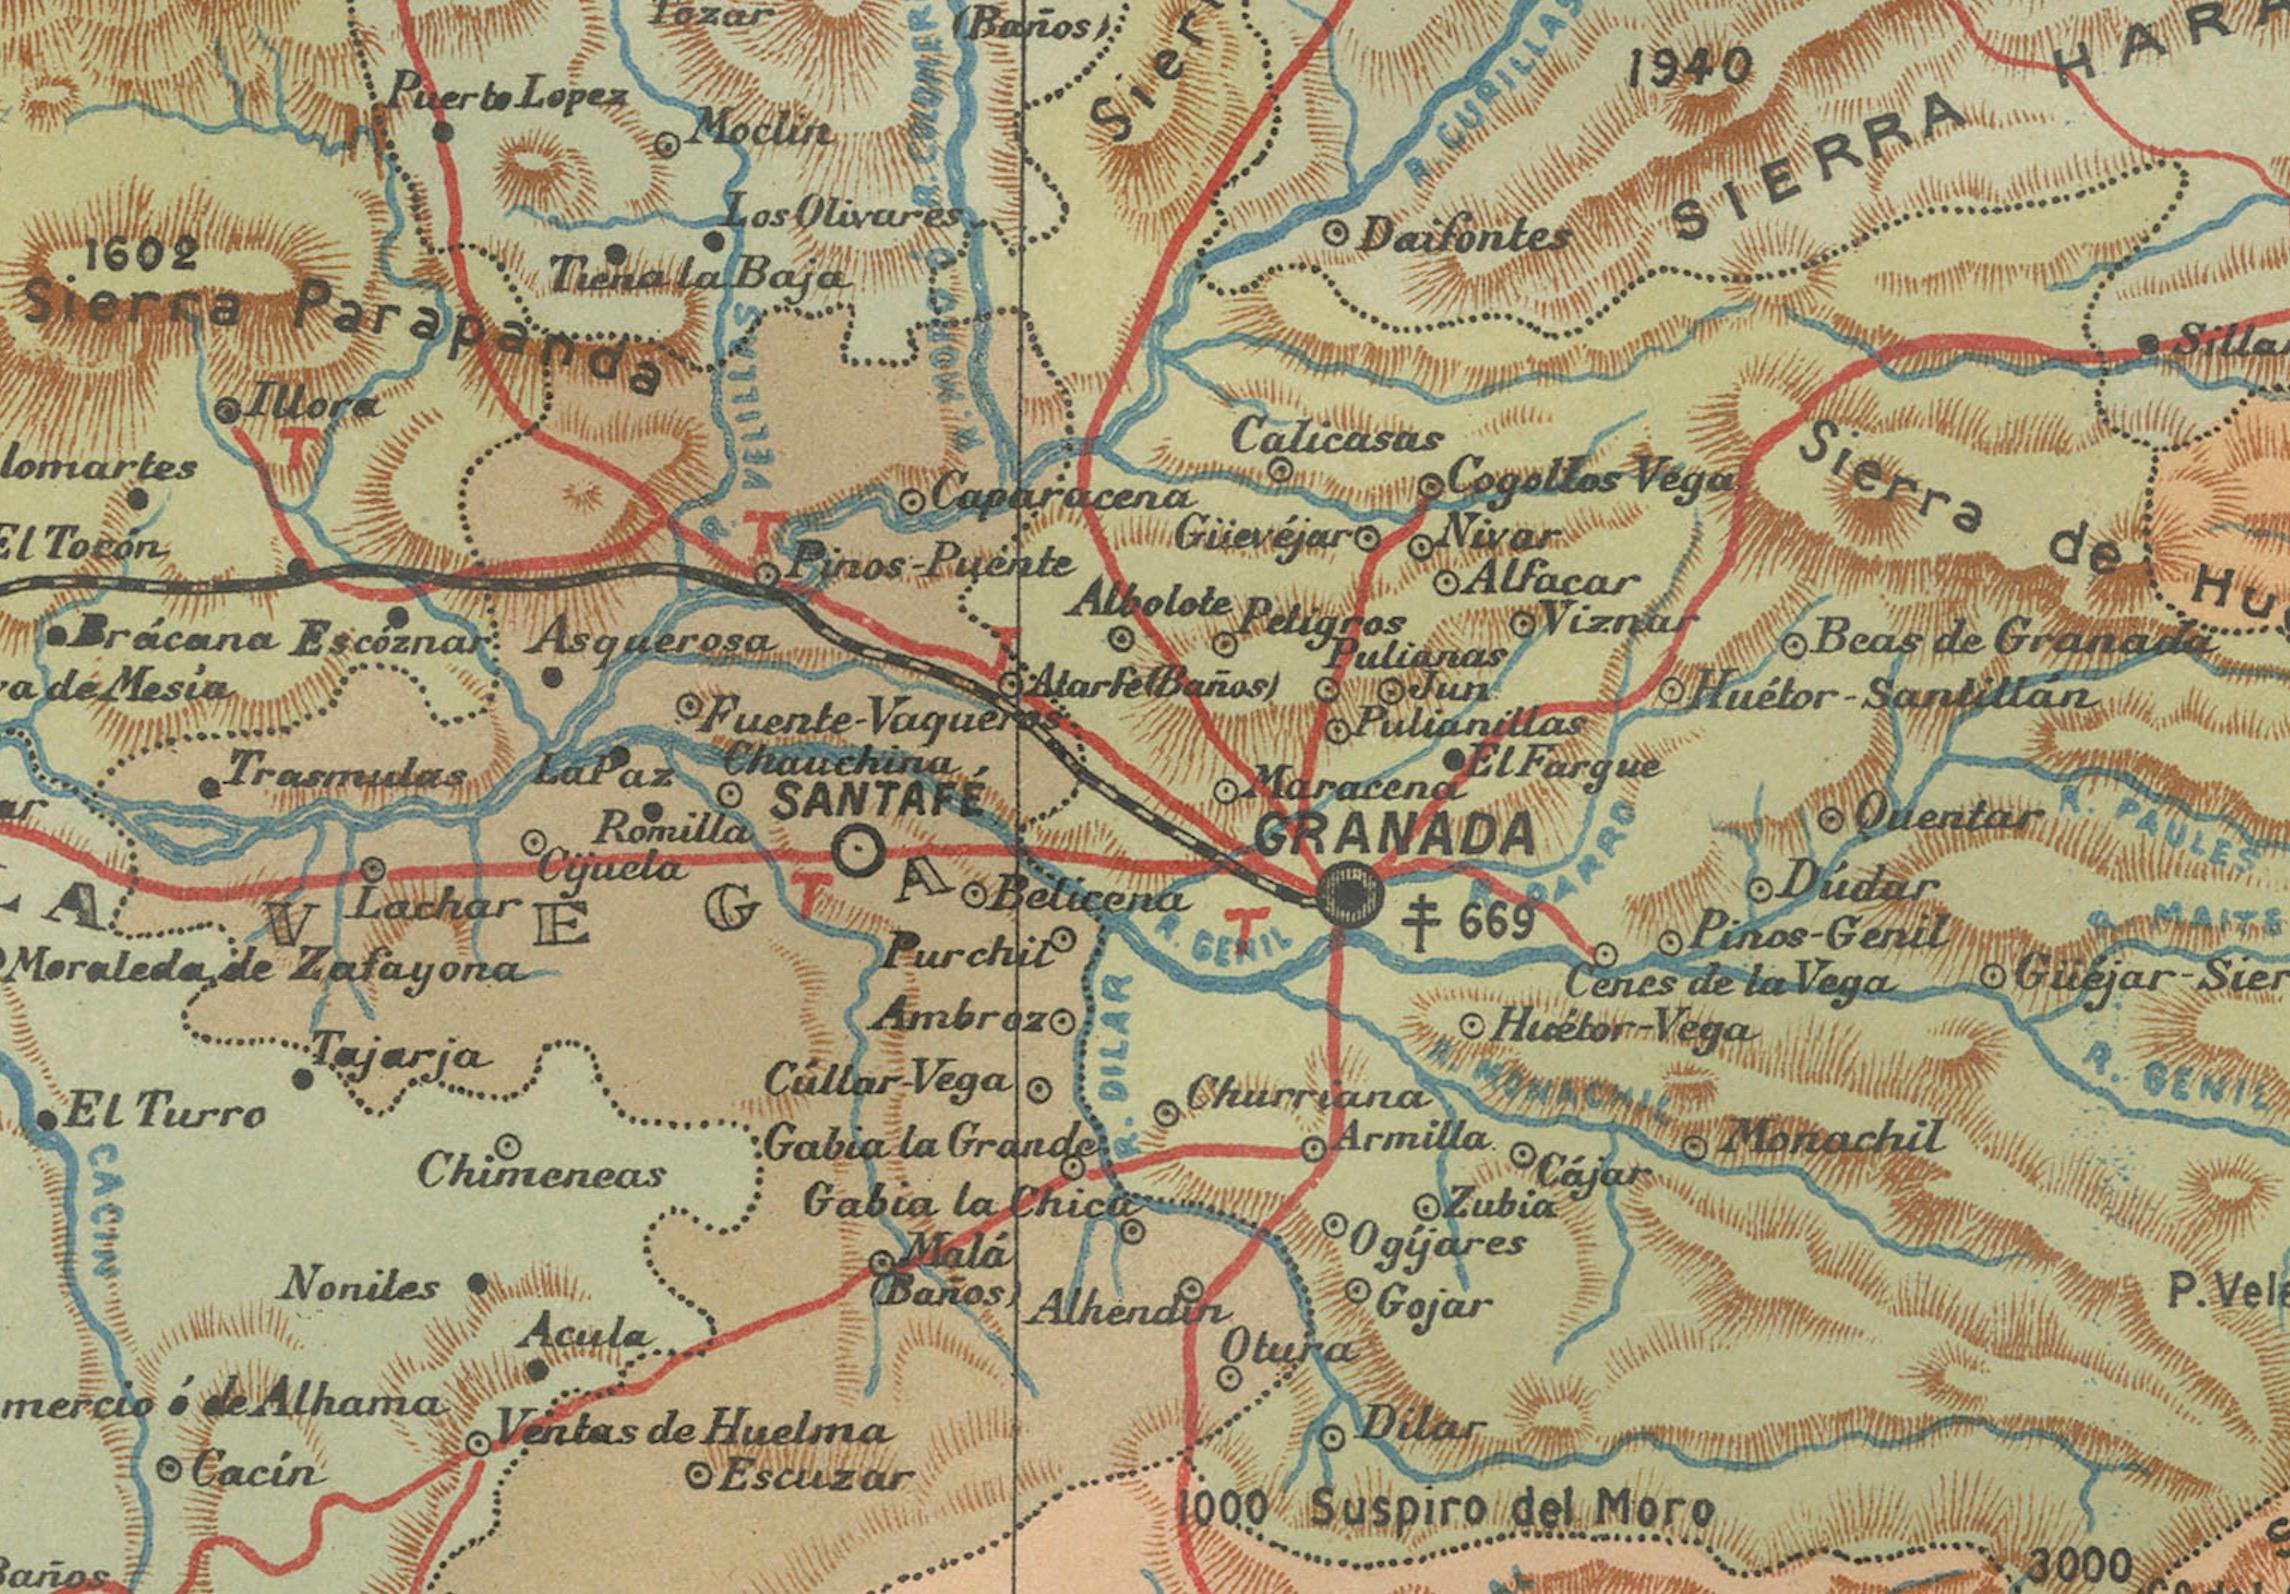 This original antique map depicts the province of Granada, part of the autonomous community of Andalusia in southern Spain, as of 1902. The map features several important details:

It shows the diverse terrain of Granada, including the Sierra